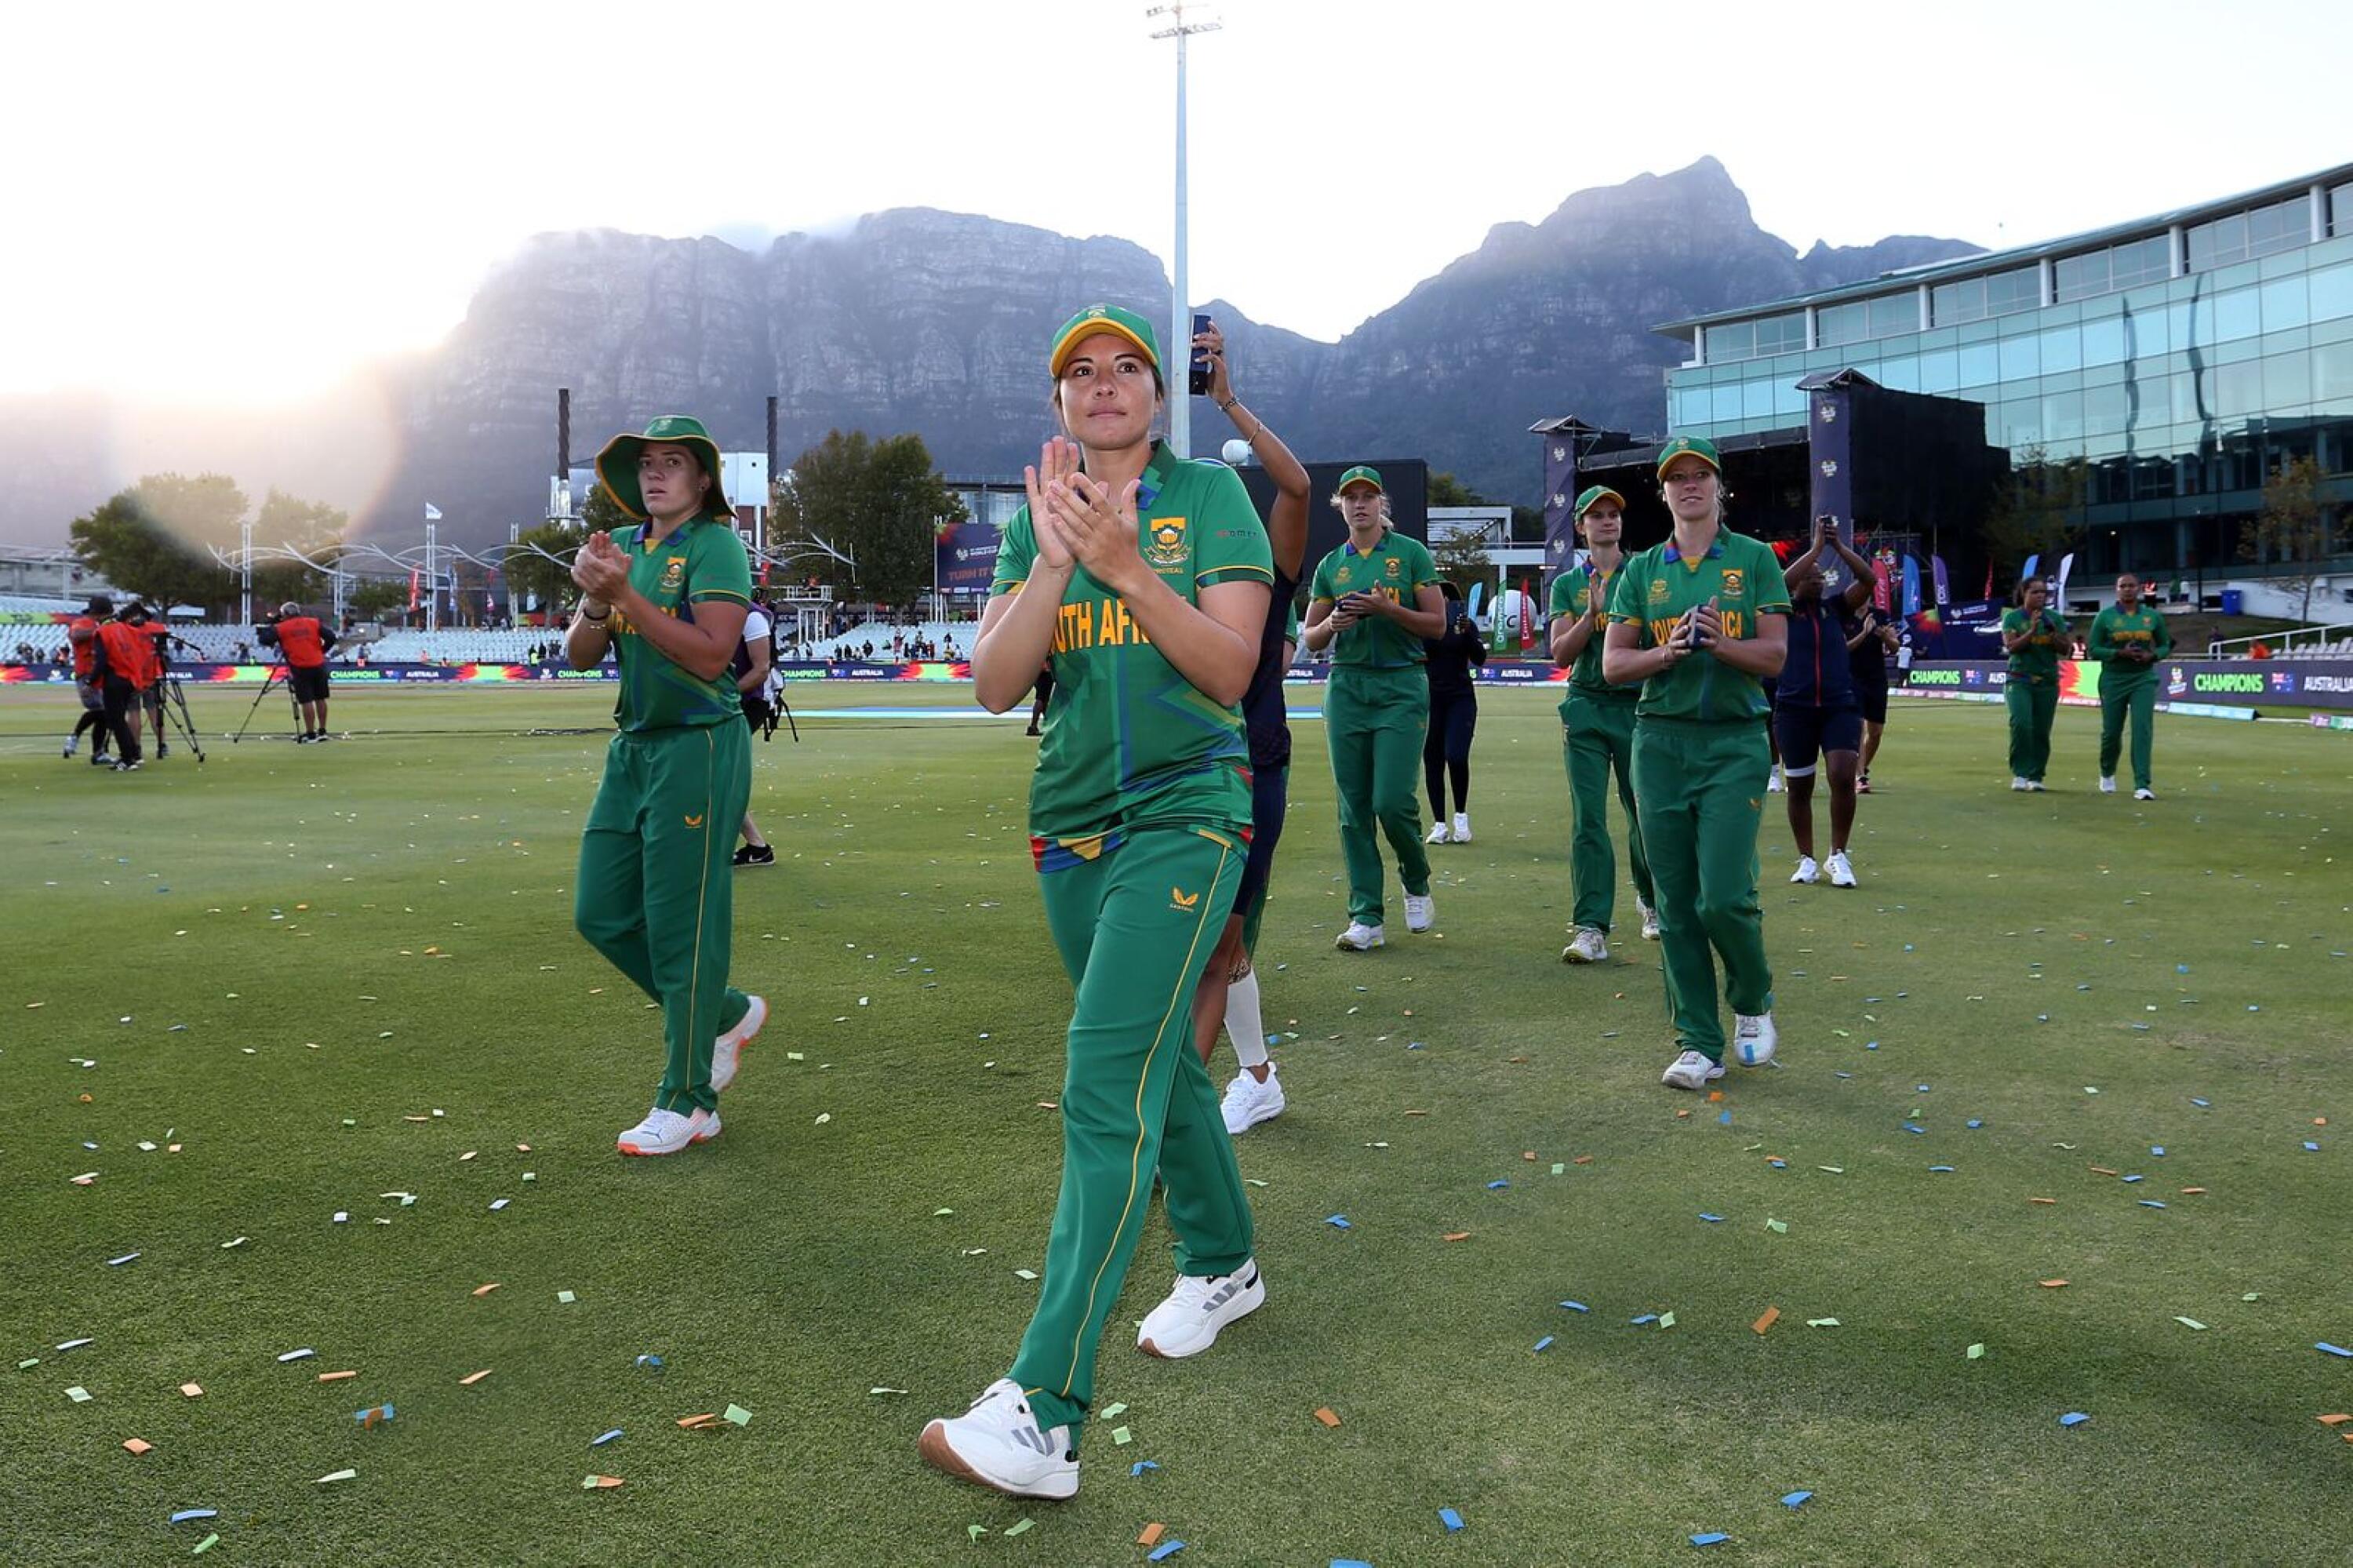 South Africa captain Suné Luus and her team thank the fans for their support following Sunday’s T20 World Cup Final against Australia at Newlands Cricket Ground in Cape Town